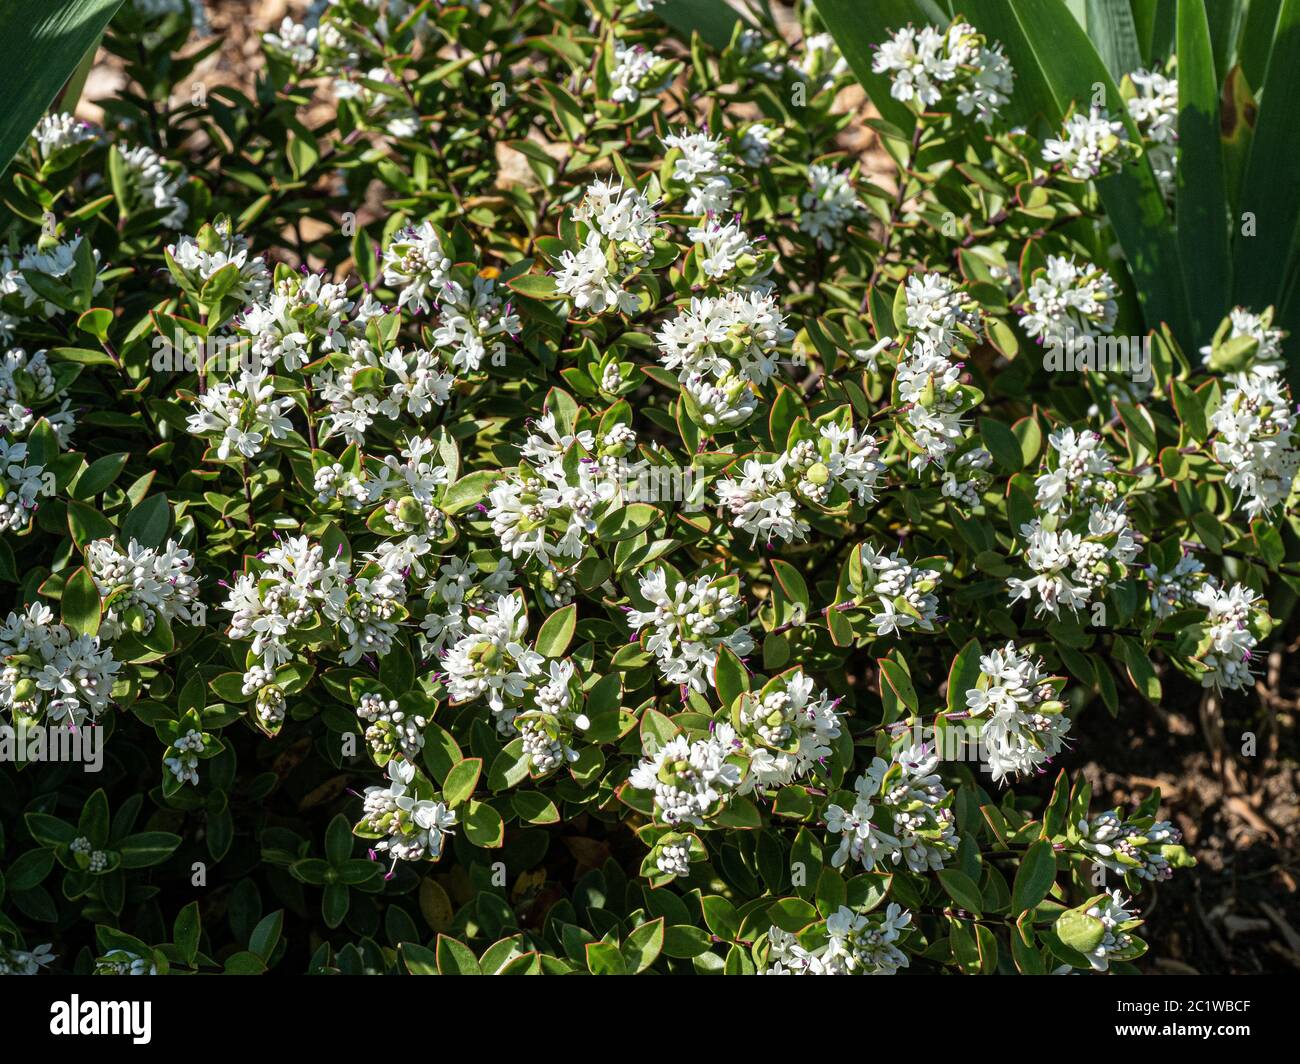 A plant of Hebe decumbens covered in short white flower spikes Stock Photo